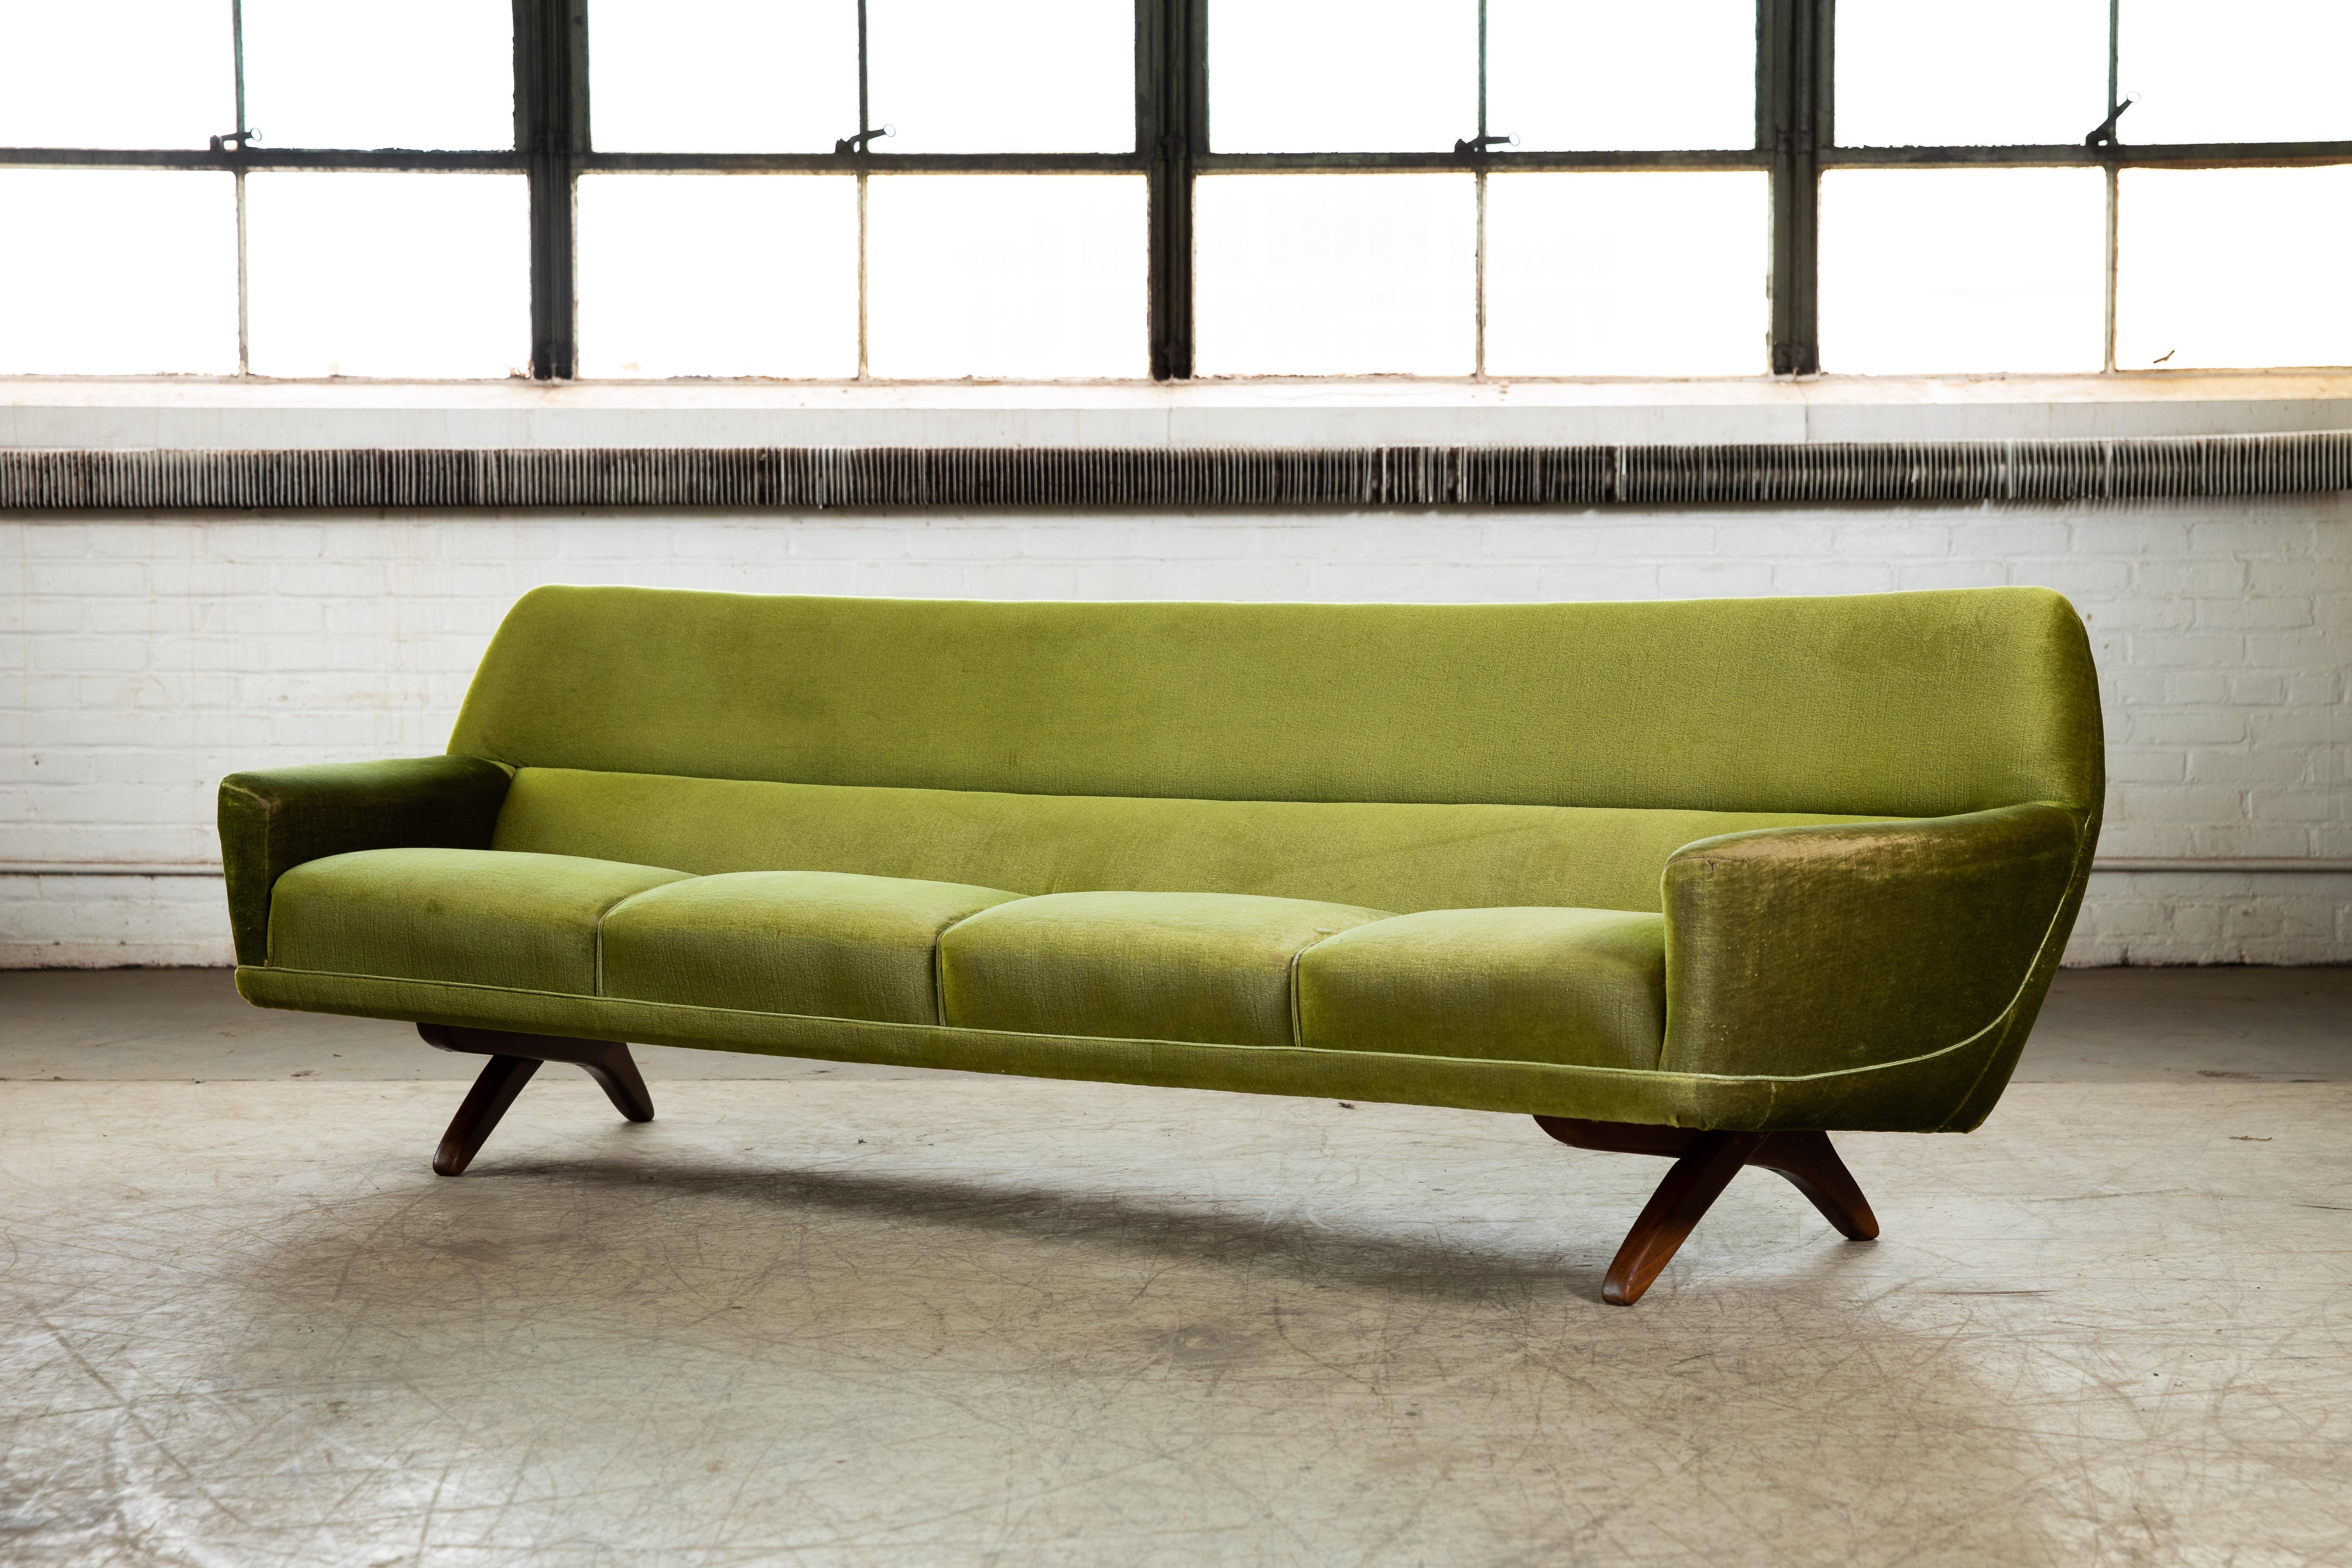 Stunning large Danish modern 1960s sofa designed by Illum Wikkelso and manufactured by Soren Willadsen in the early 1960s. Cross leg design in solid teak typical for many of Wikkelso's iconic designs and beautiful rounded organic lines. Wikkelso has